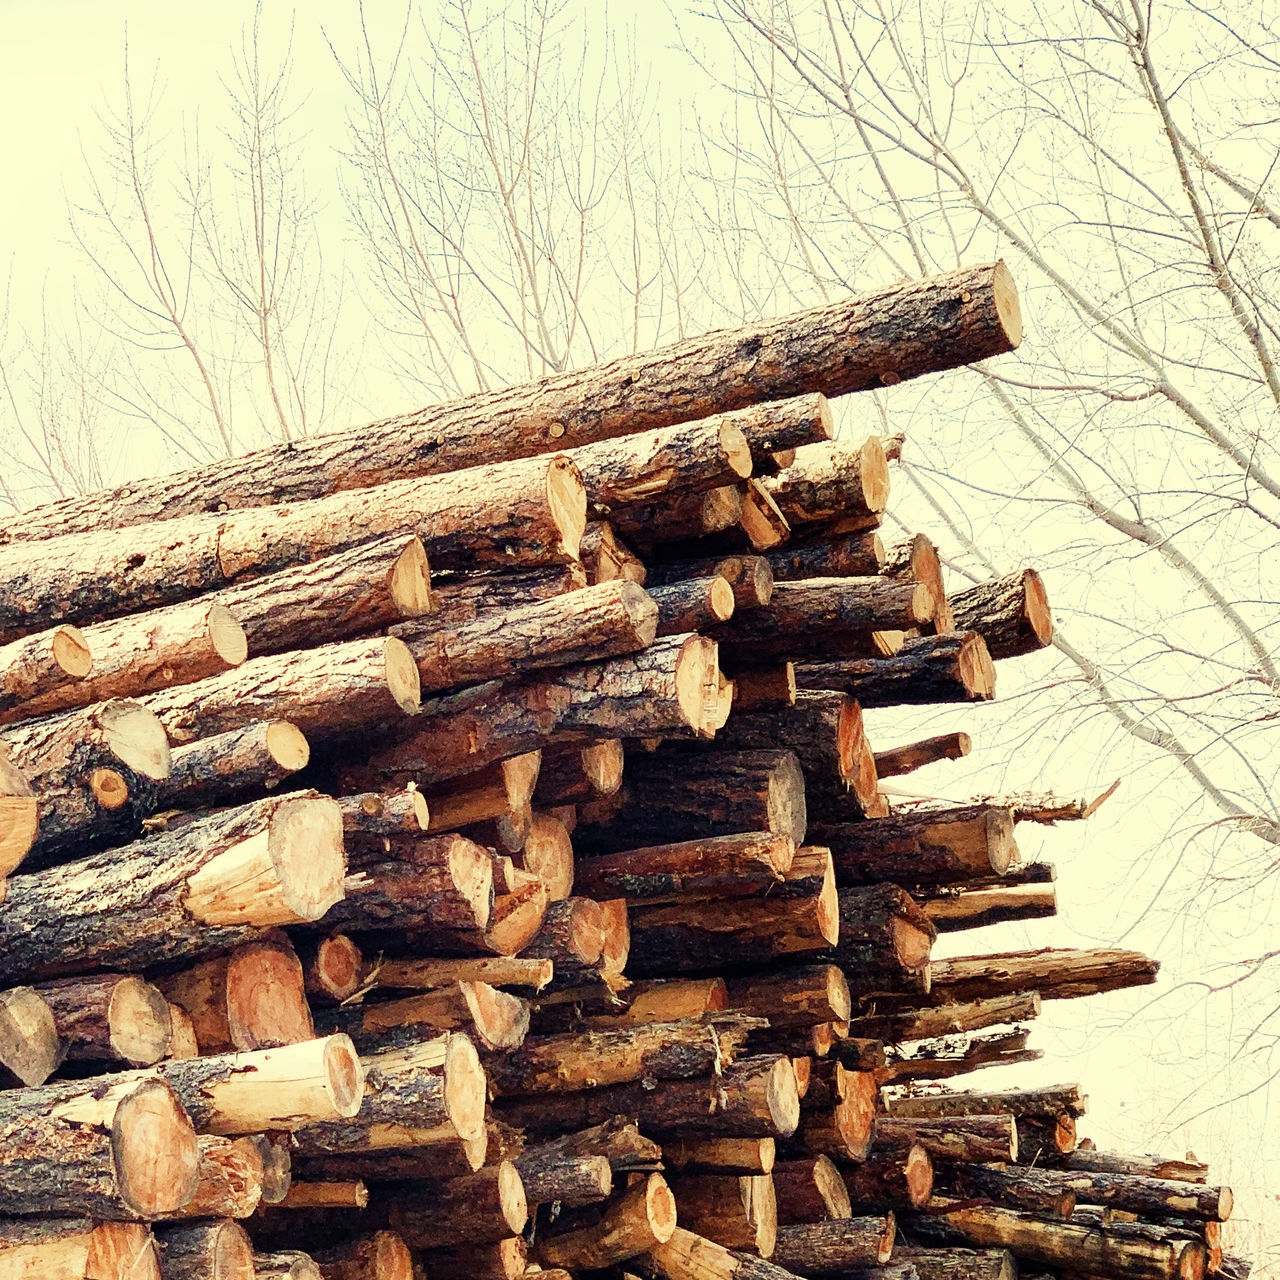 STACK OF LOGS ON TREE IN FOREST